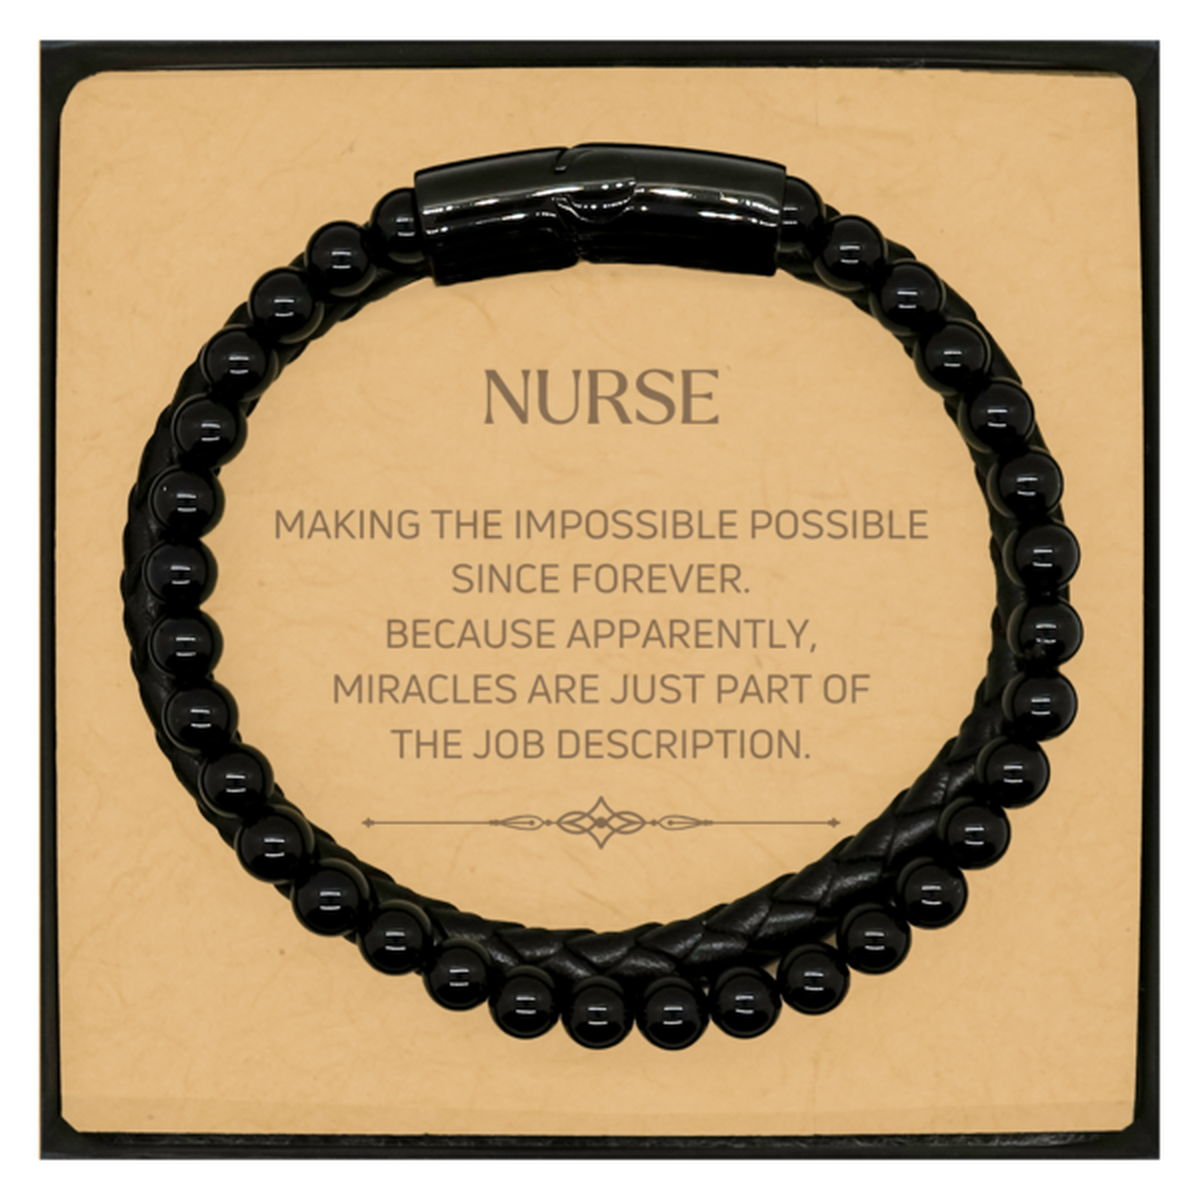 Funny Nurse Gifts, Miracles are just part of the job description, Inspirational Birthday Christmas Stone Leather Bracelets For Nurse, Men, Women, Coworkers, Friends, Boss